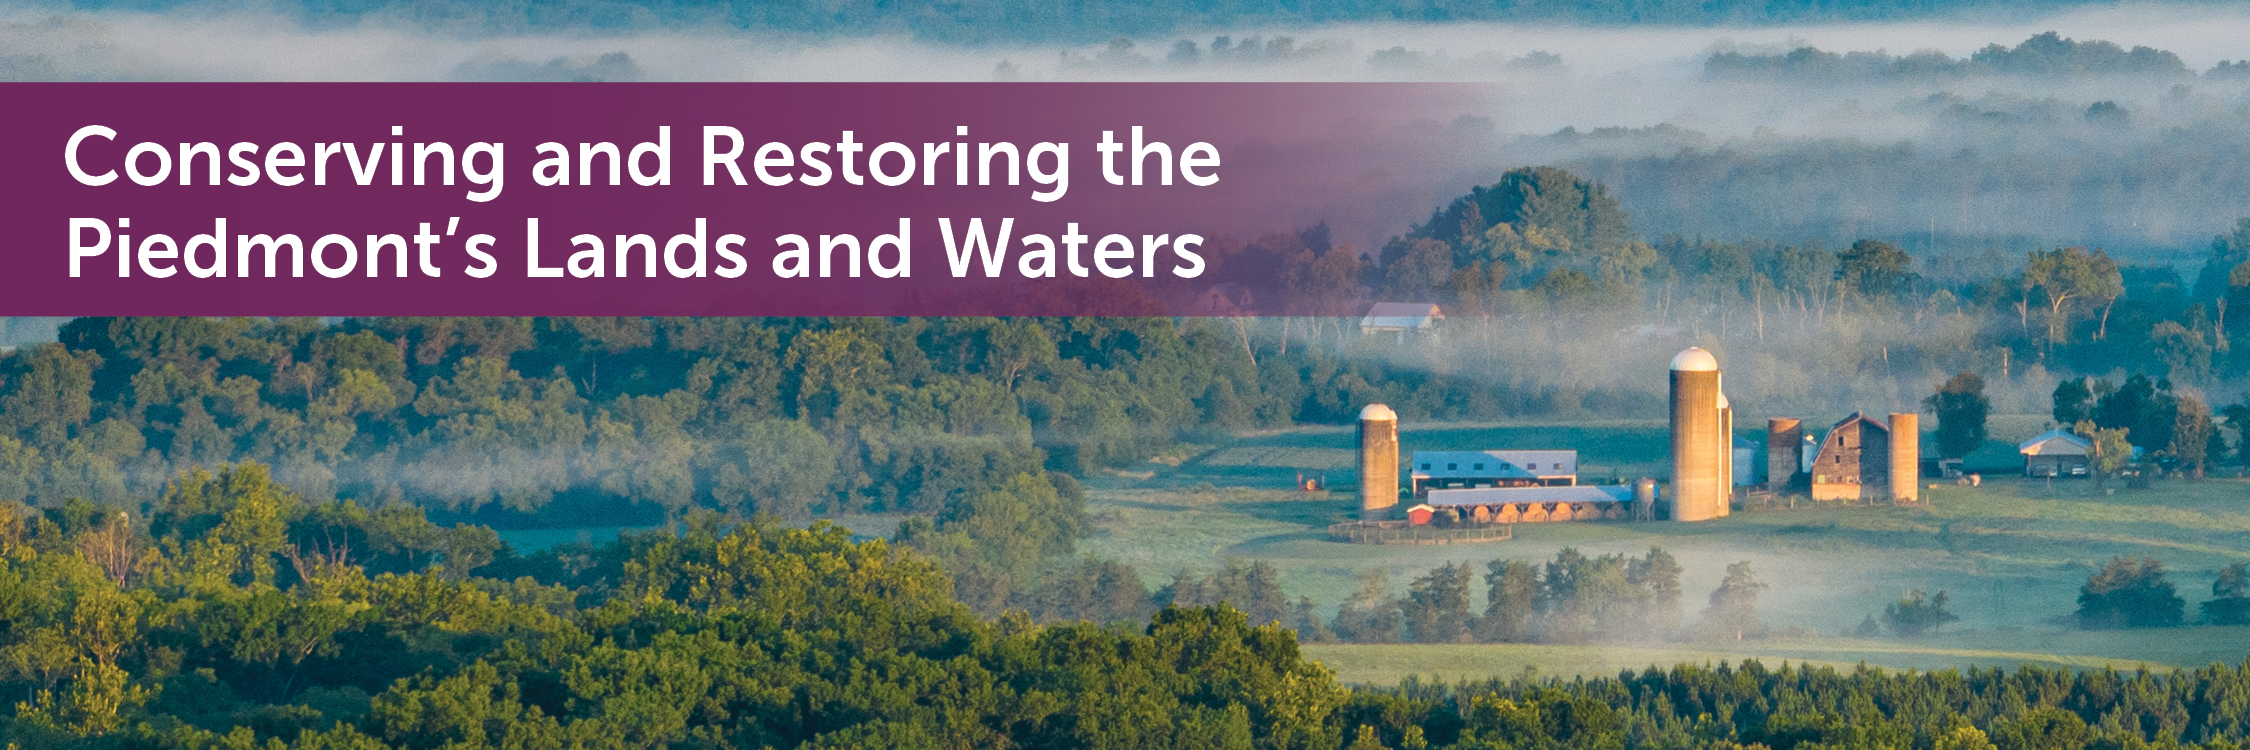 Conserving and restoring the Piedmont's lands and waters